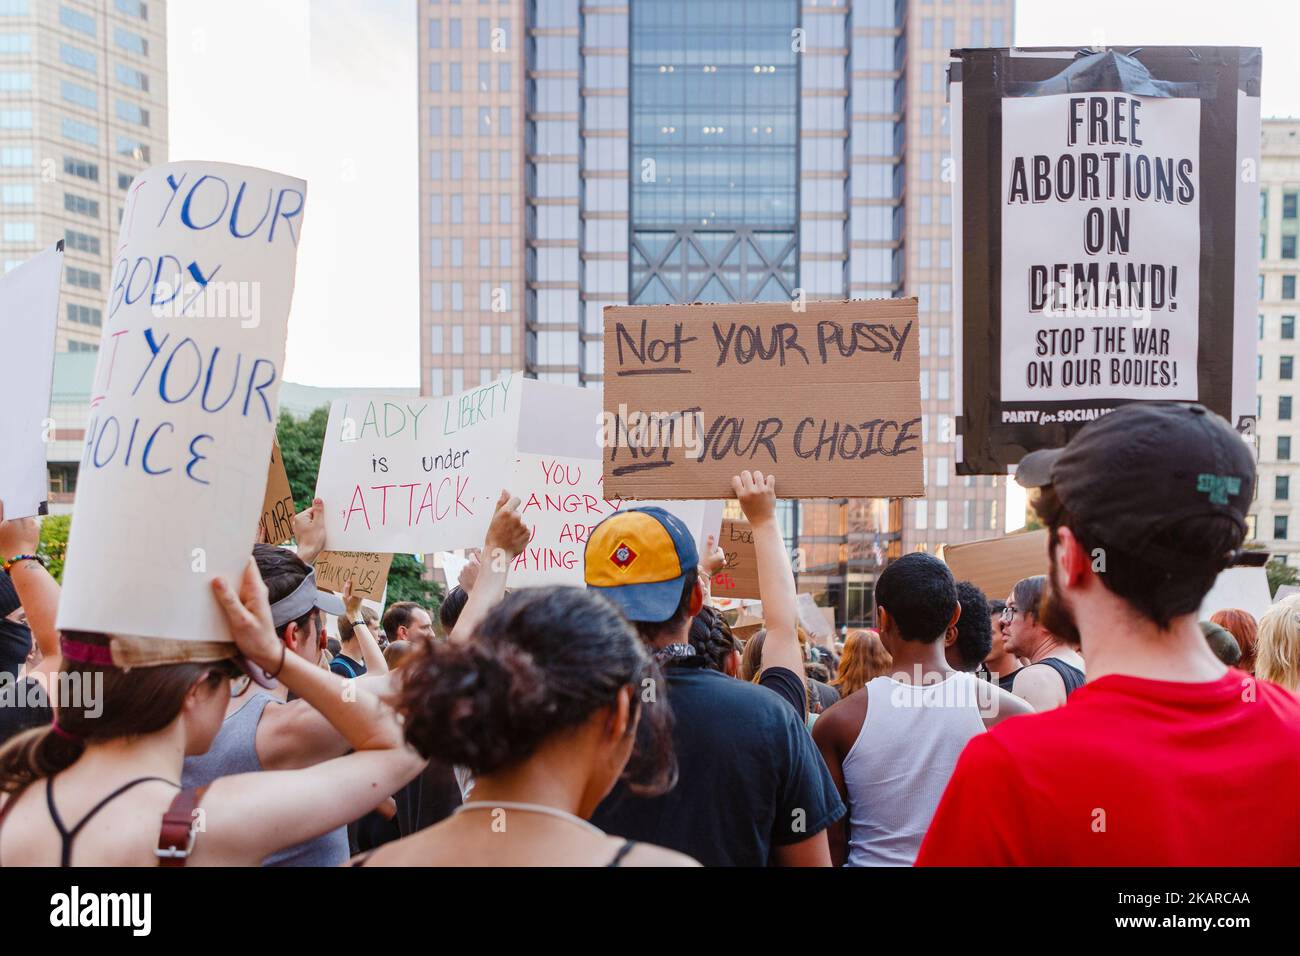 Protesters hold pro-choice signs above heads at abortion rally Stock Photo